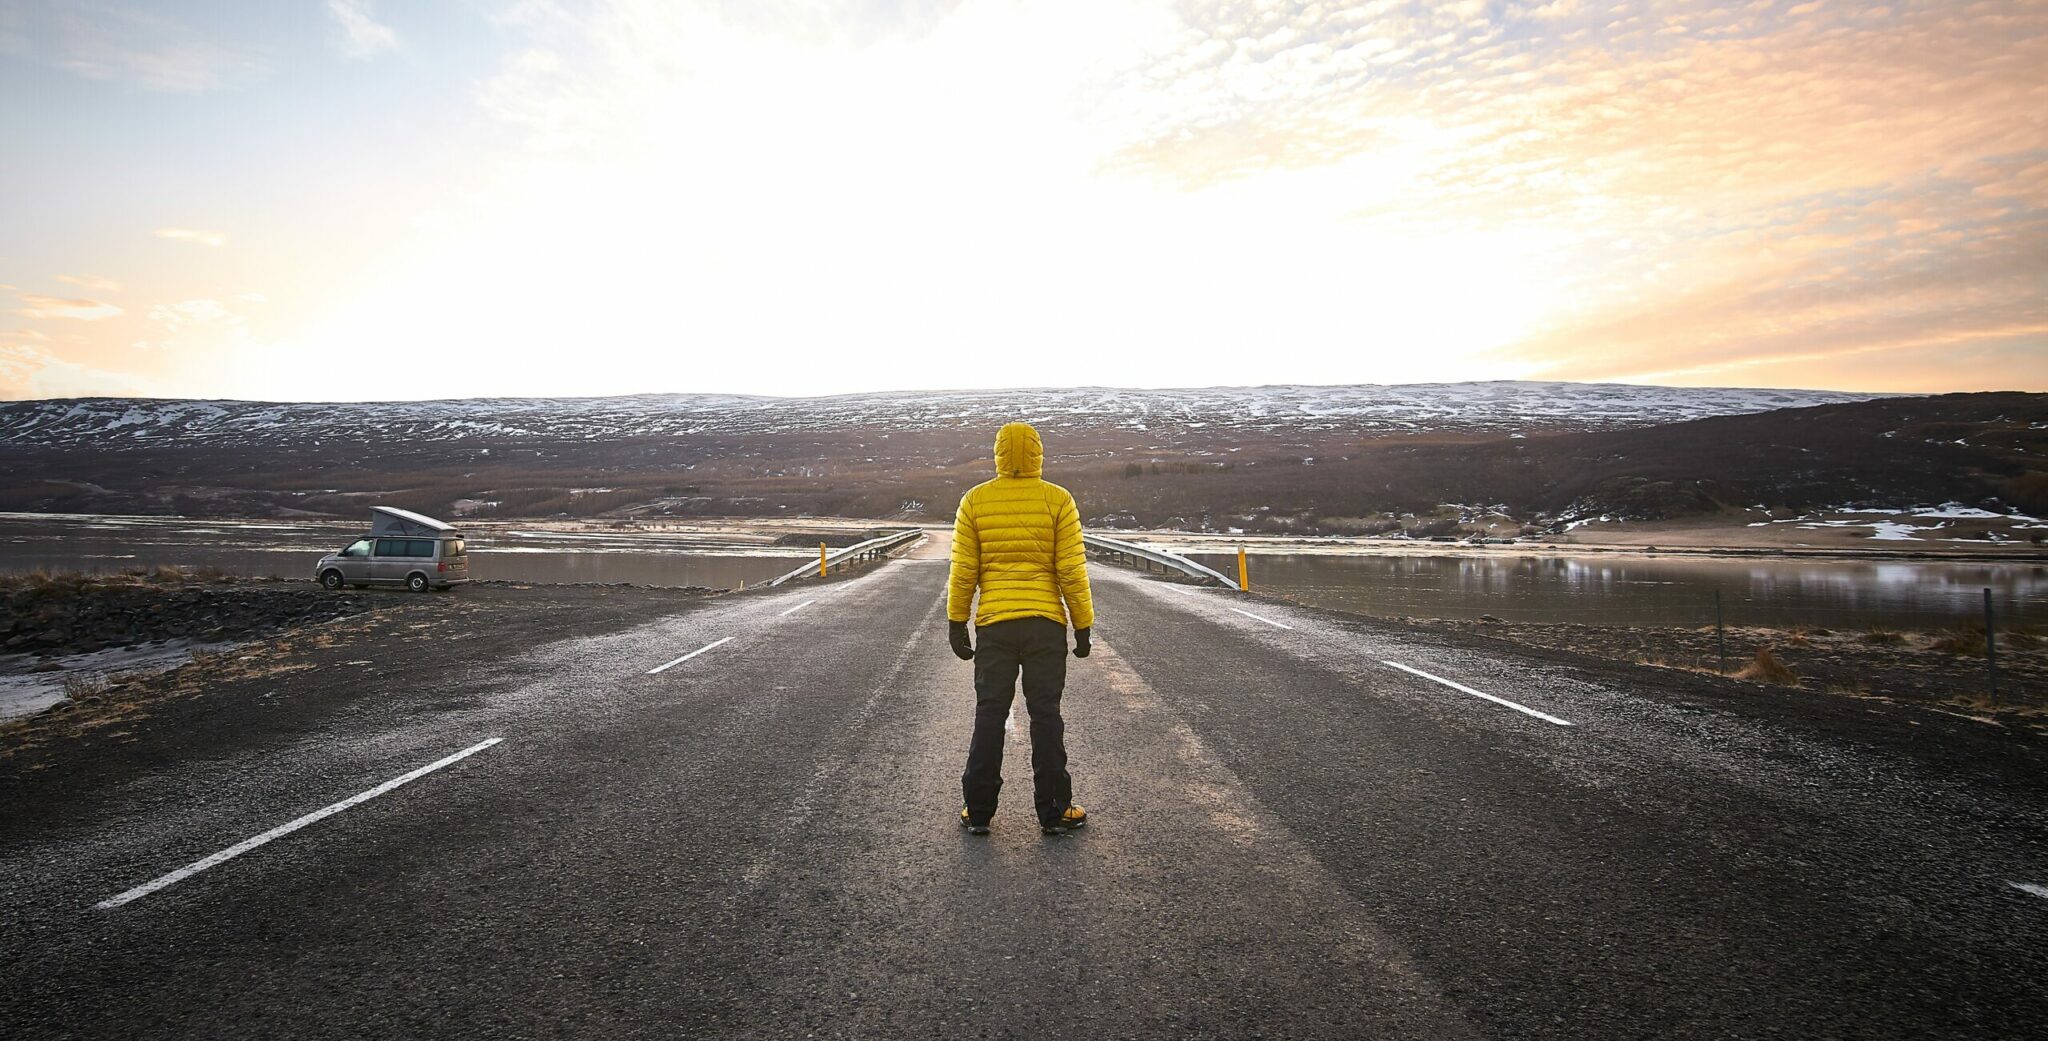 A male wearing a yellow jacket while standing in the middle of an empty road looking in the distance